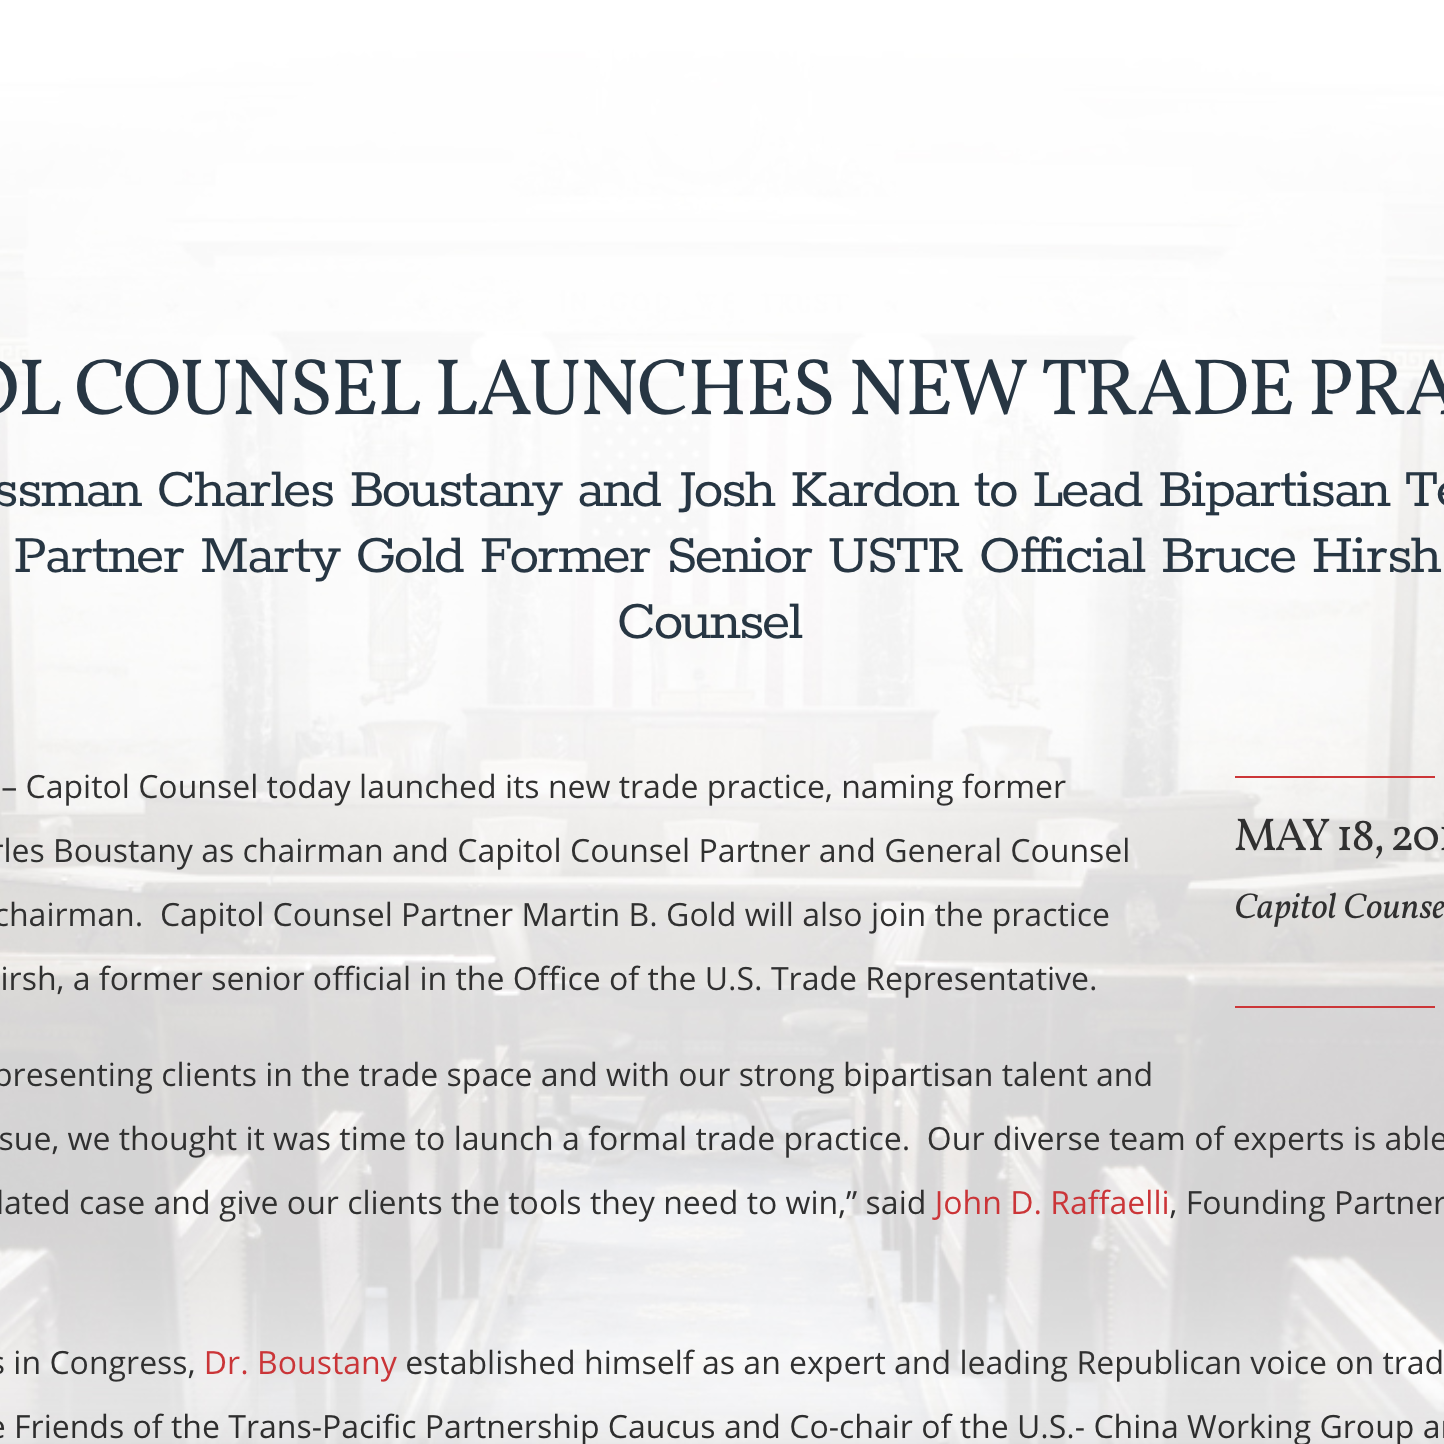 http://www.capitolcounsel.com/capitol-counsel-launches-new-trade-practice-former-congressman-charles-boustany-and-josh-kordon-to-lead-bipartisan-team-joined-by-capitol-counsel-partner-marty-gold-former-senior-ustr-official-bruce/